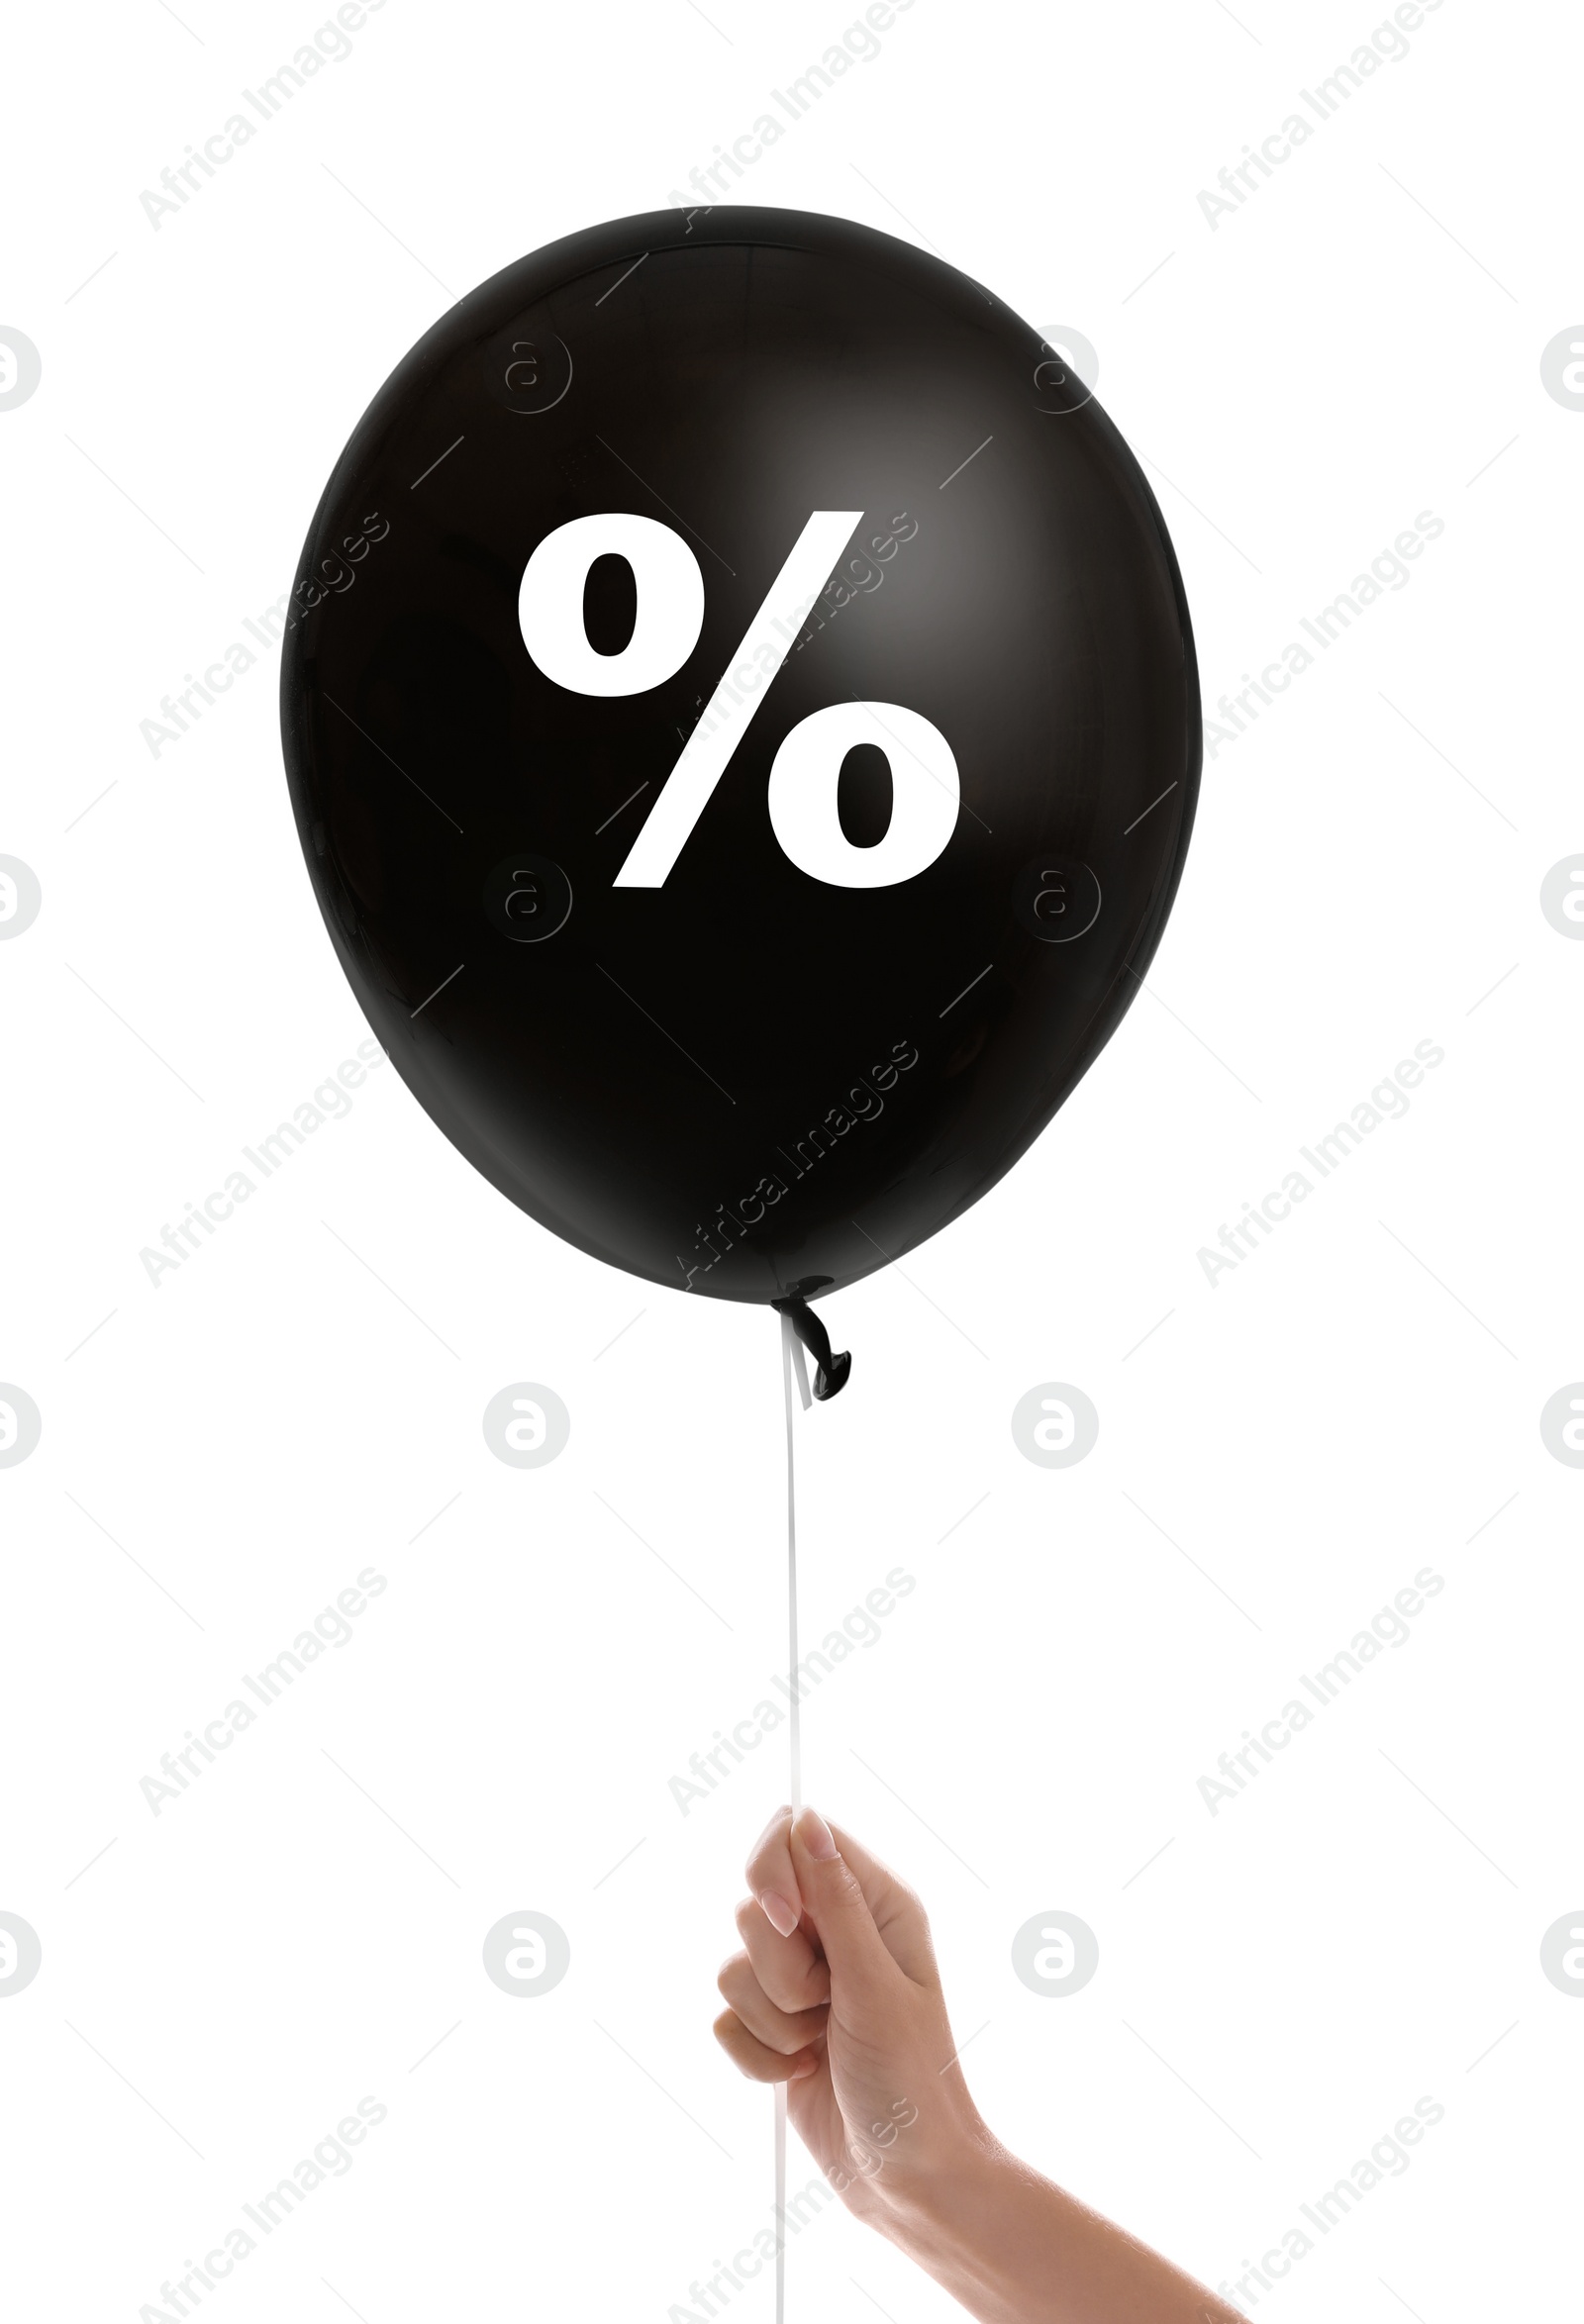 Image of Discount offer. Woman holding black balloon with percent sign on white background, closeup